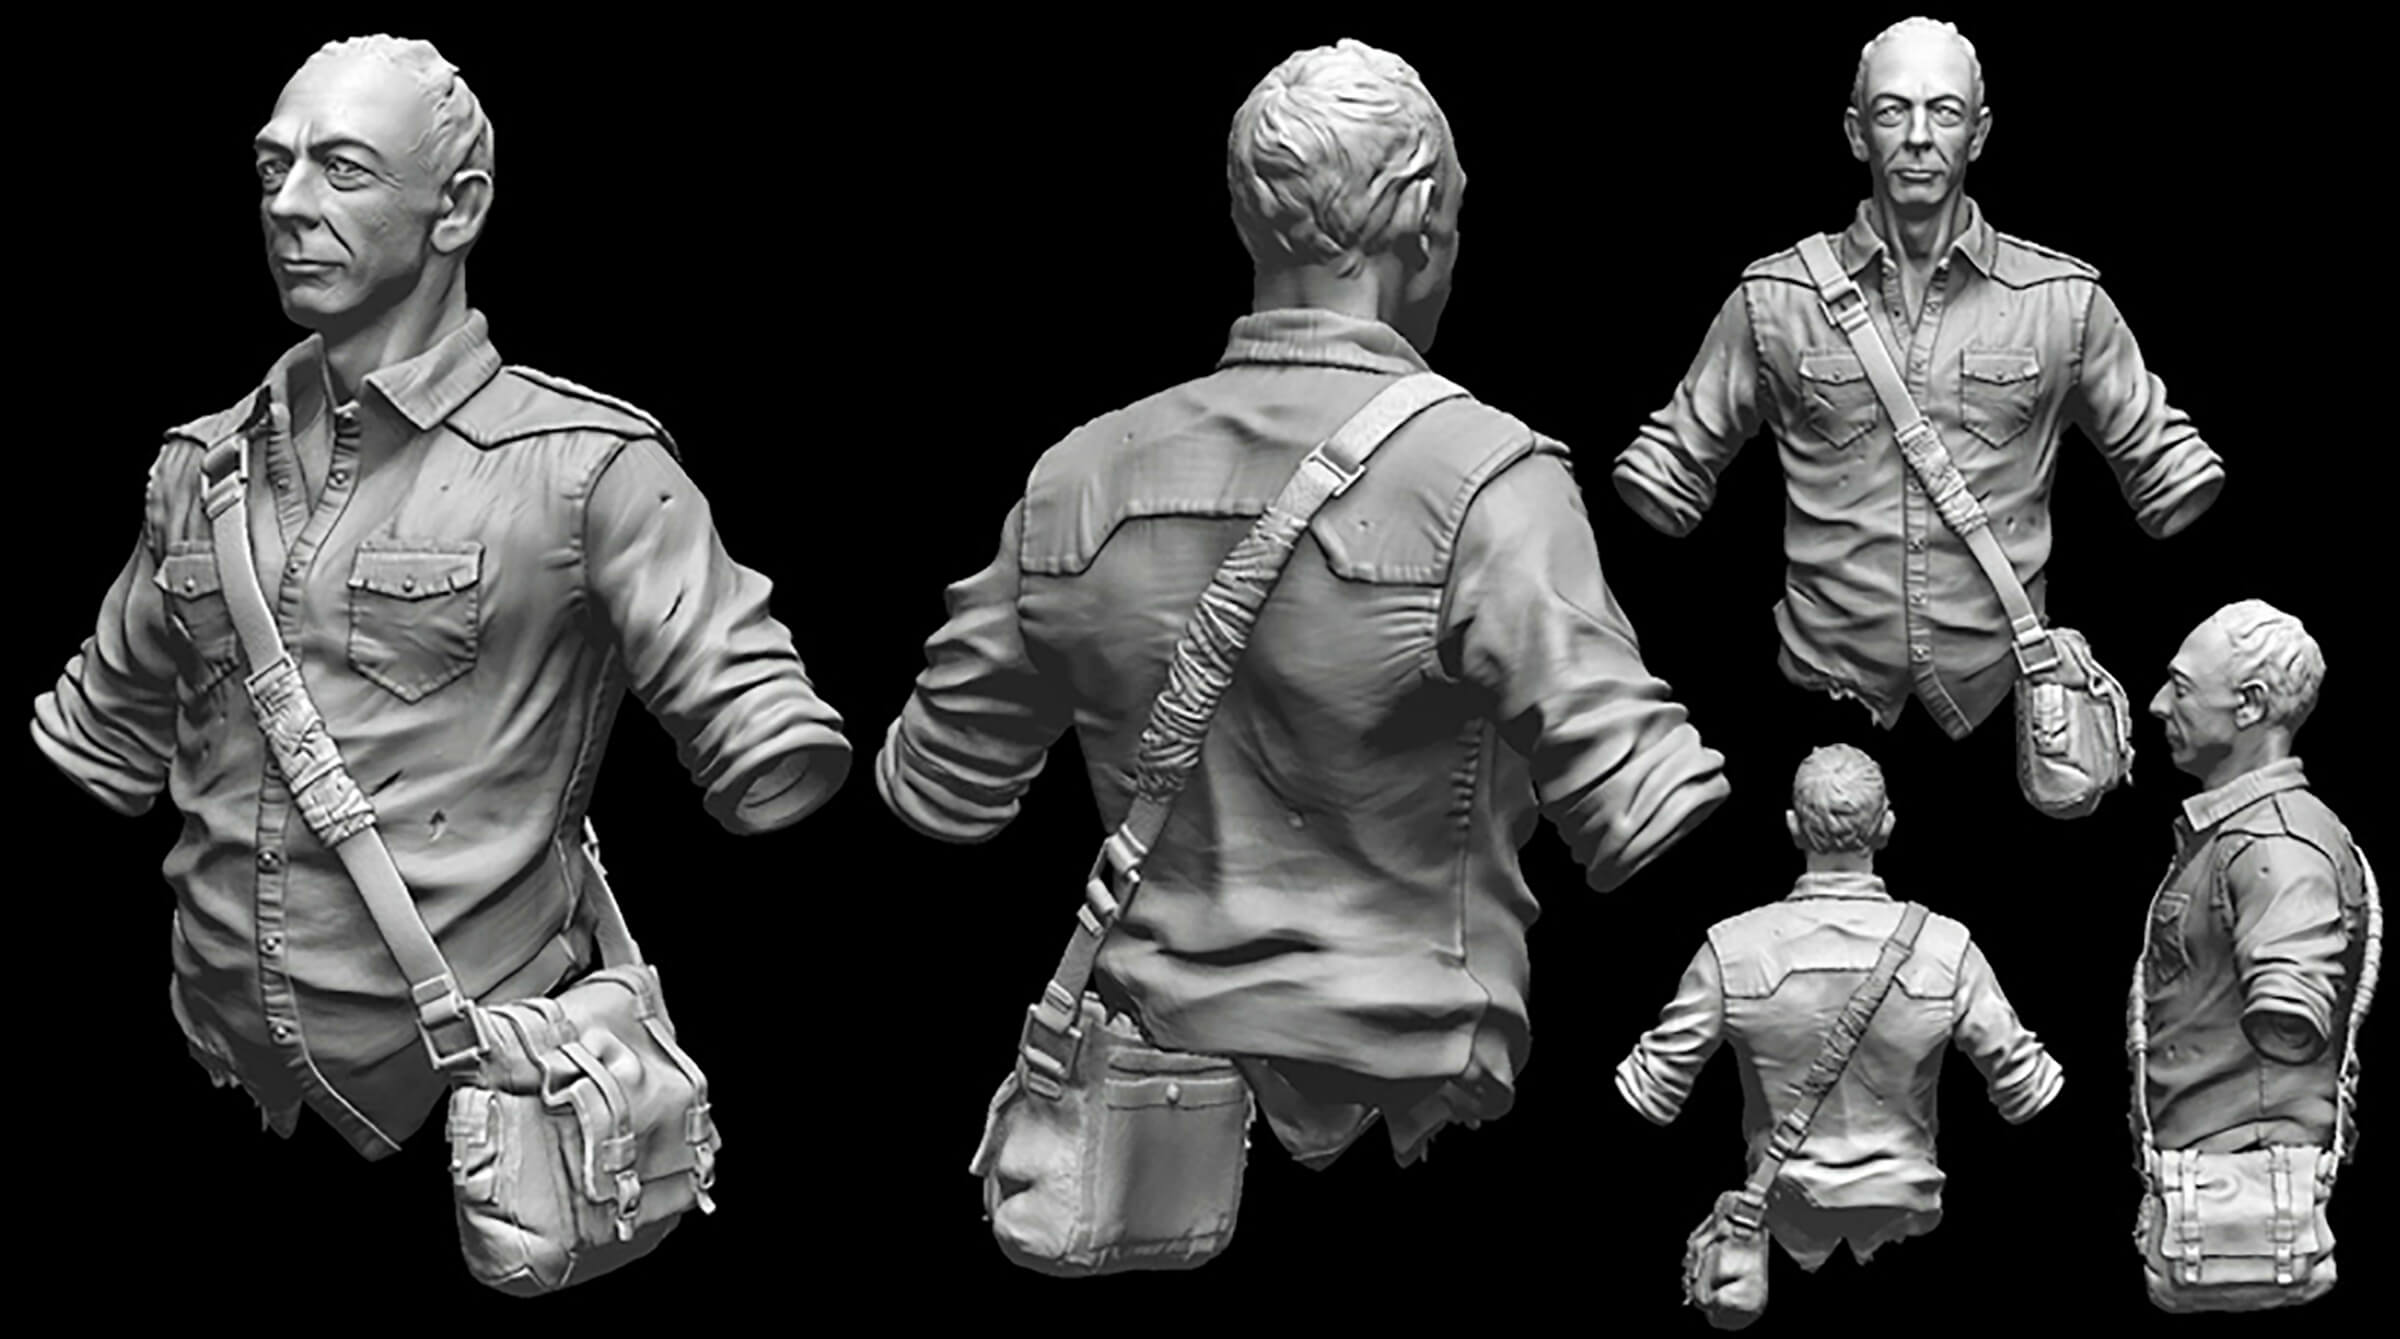 computer-generated 3d models of an older man in a safari shirt with a small messenger bag slung across his chest